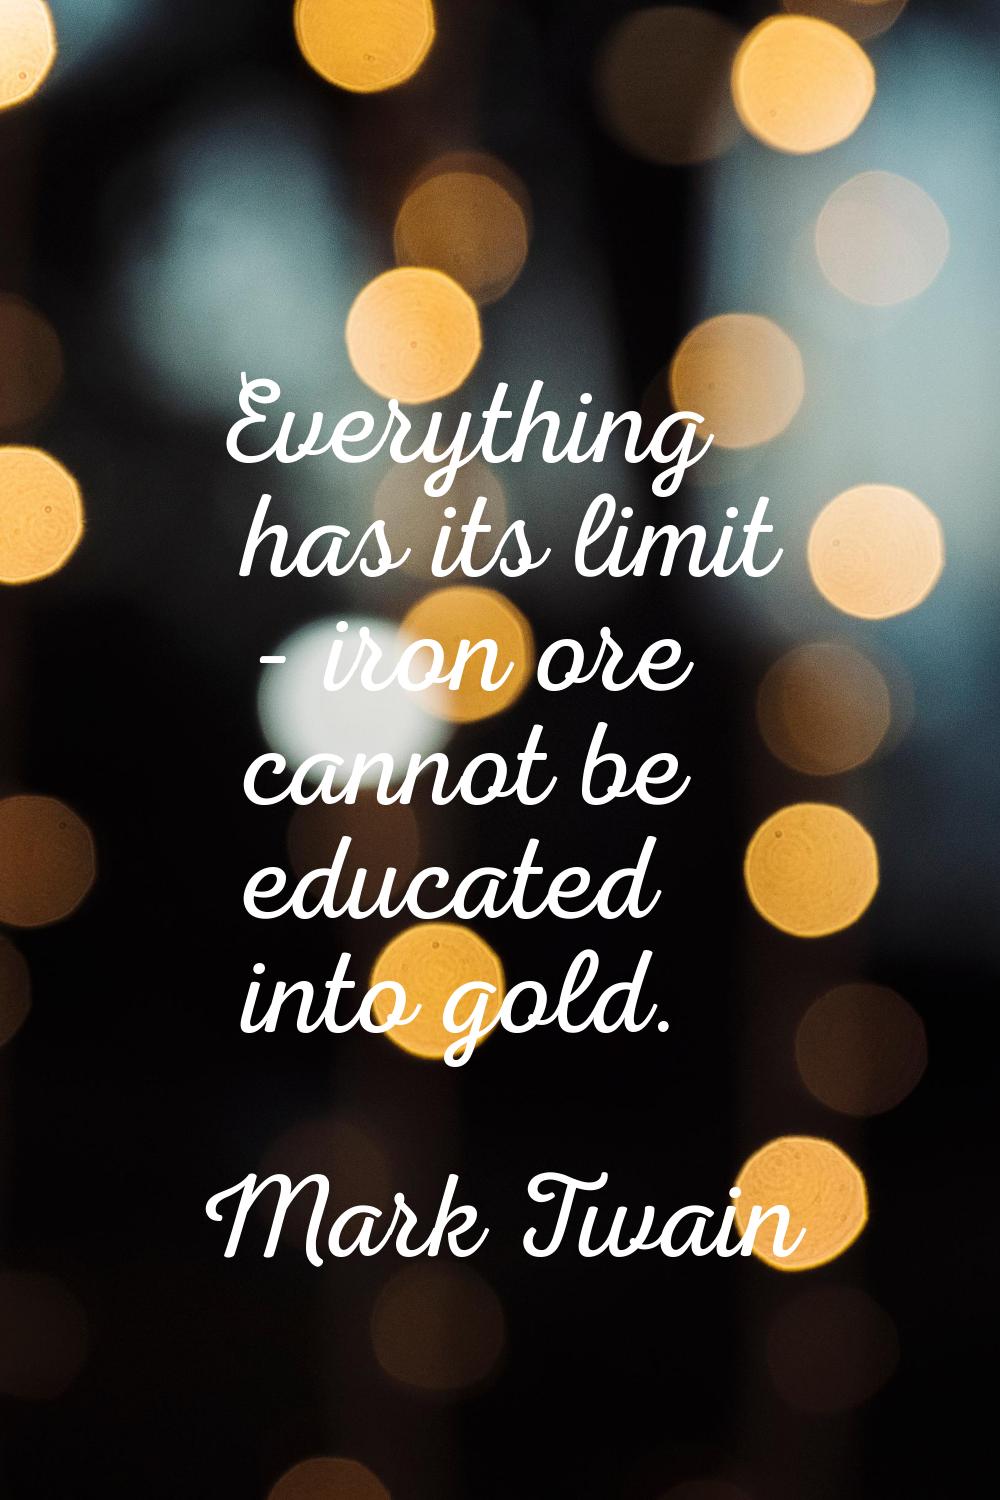 Everything has its limit - iron ore cannot be educated into gold.